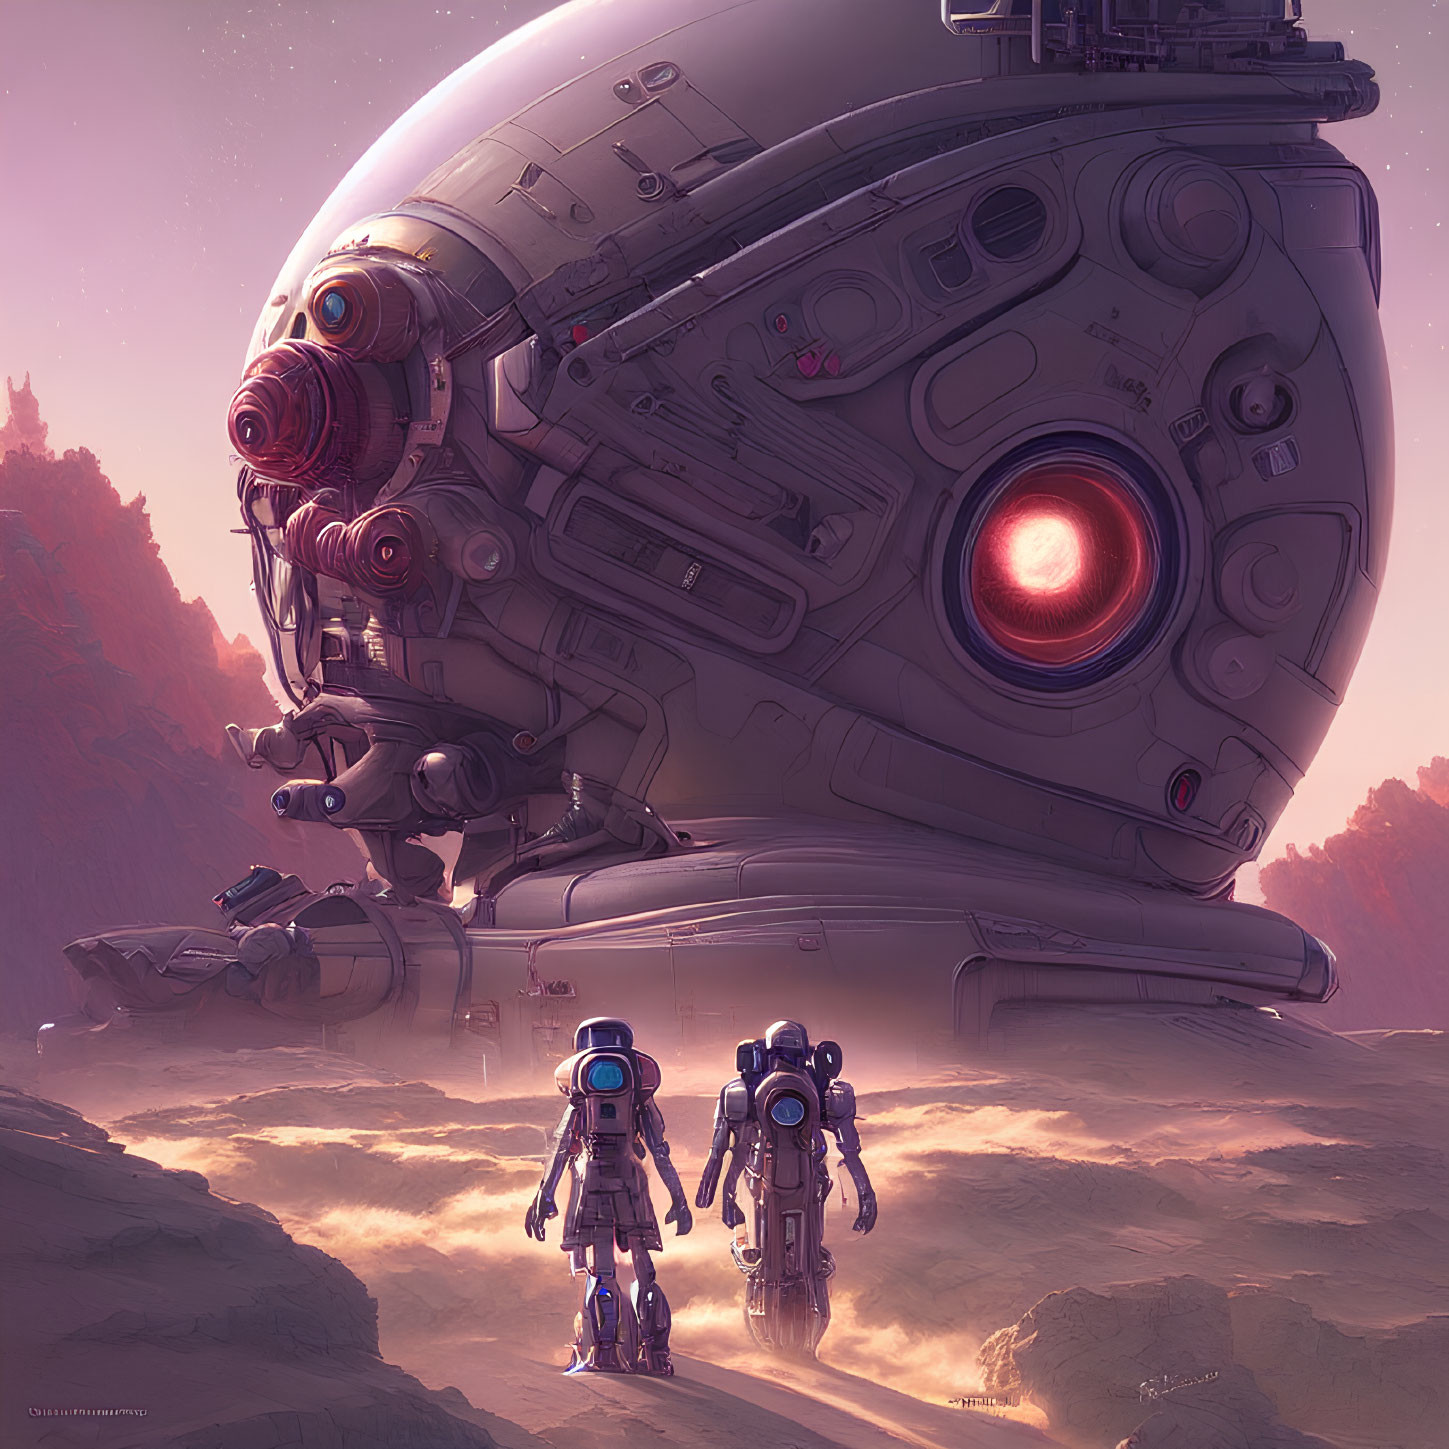 Humanoid robots gaze at large spherical spacecraft on rocky alien planet under pink sky